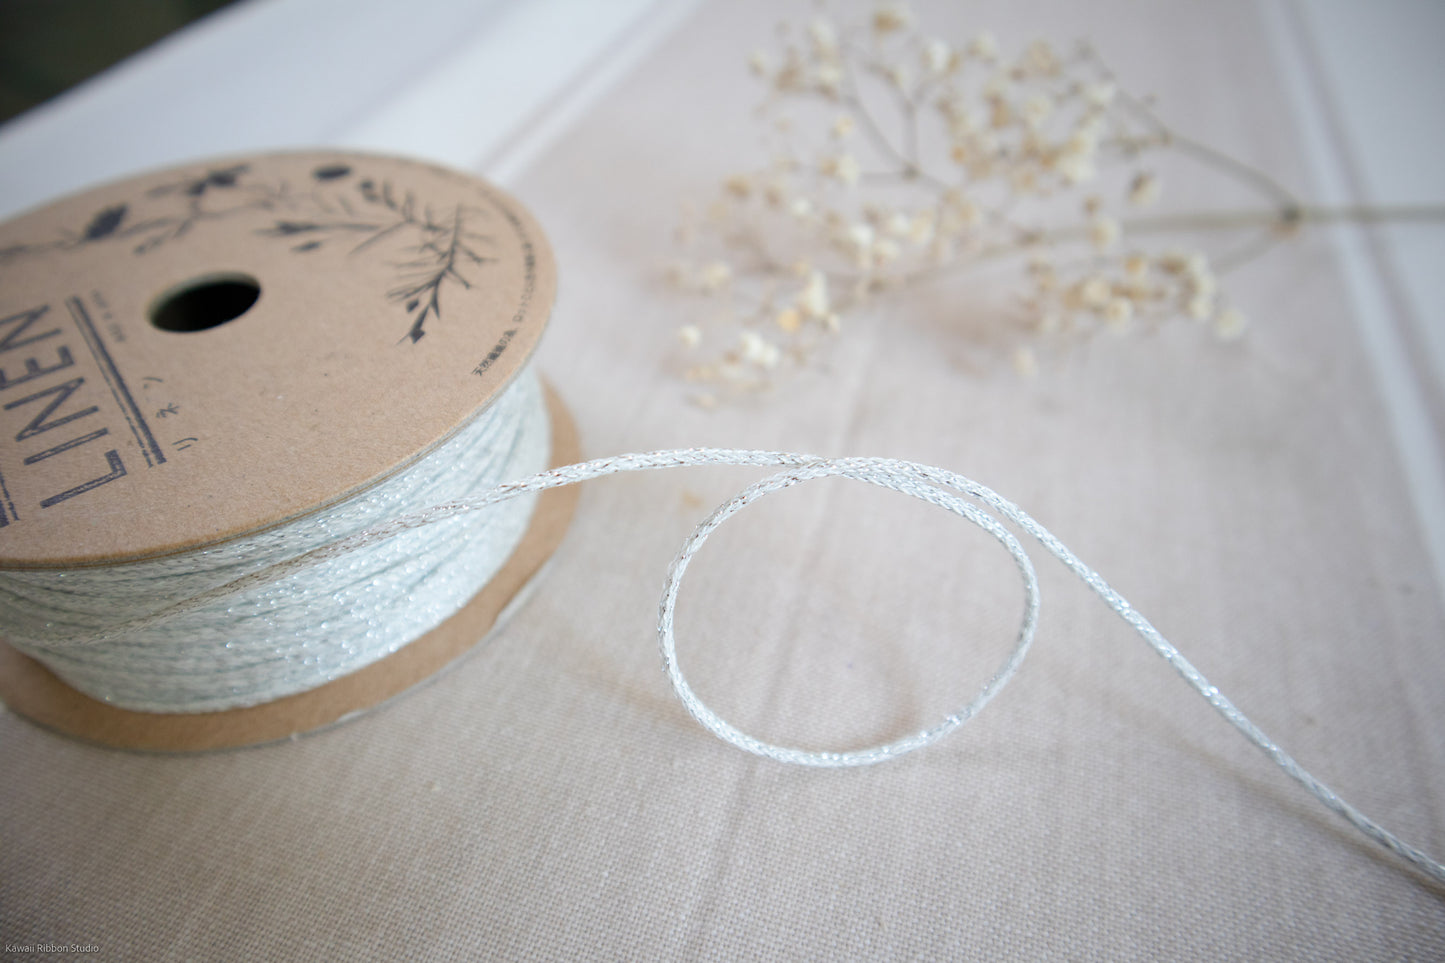 2mm White silver metallic jewelry cord in washed linen